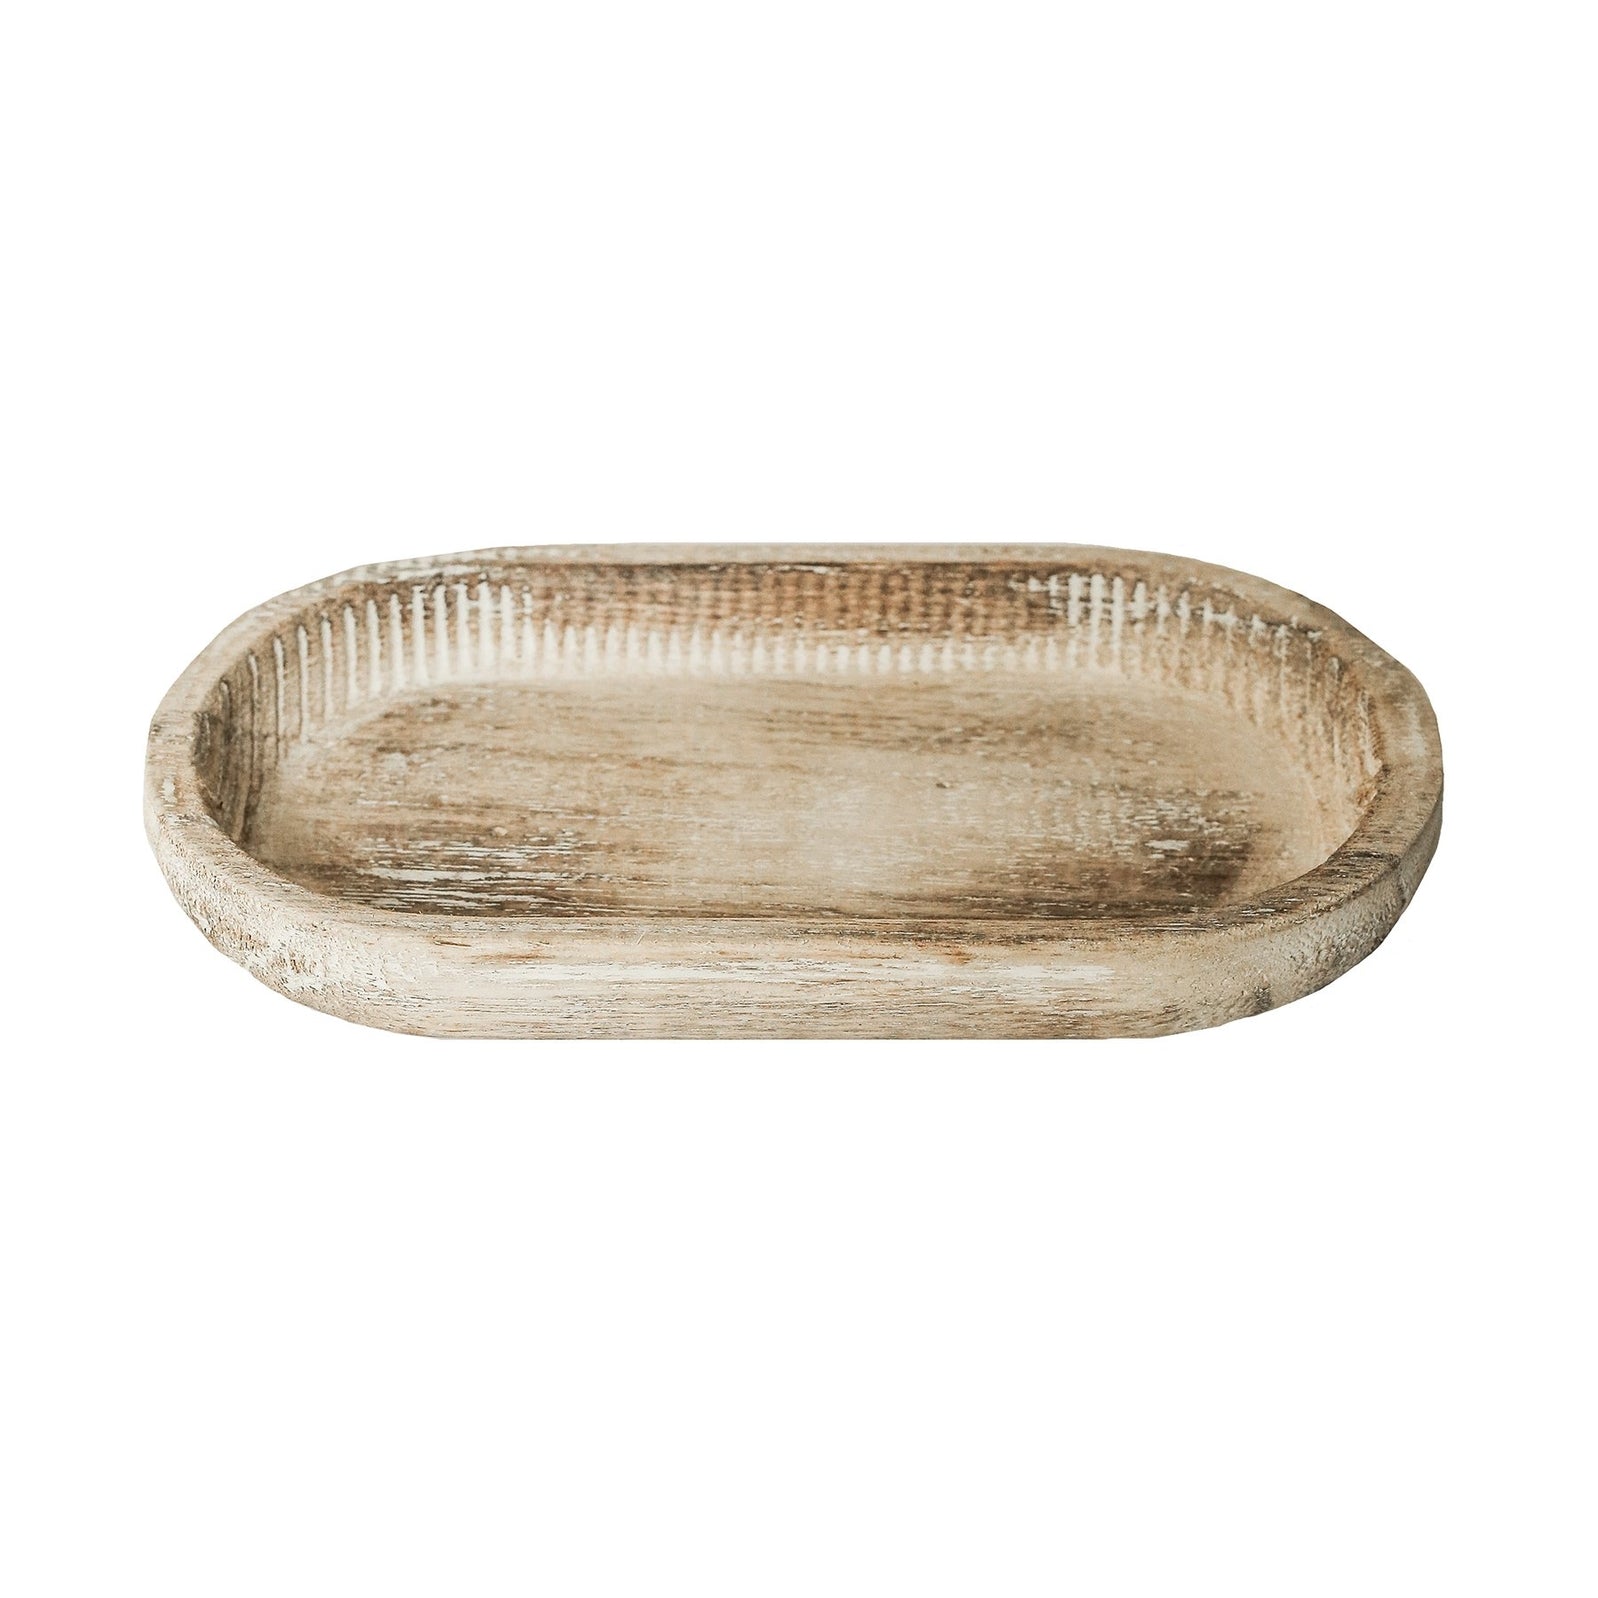 Small Rustic Wood Tray - FINAL SALE